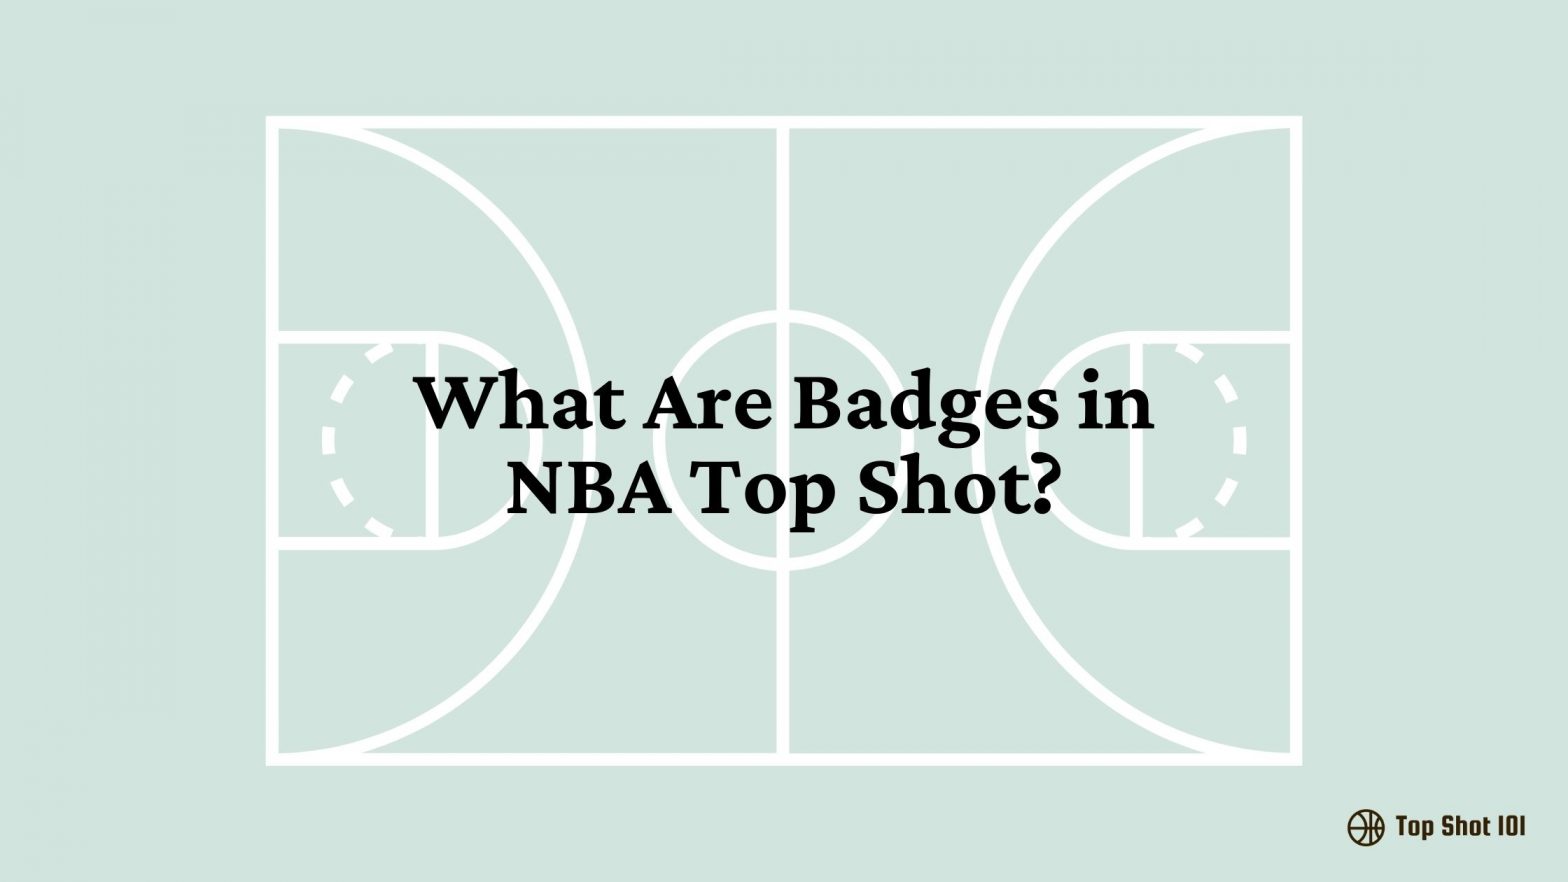 What Are Badges in NBA Top Shot?